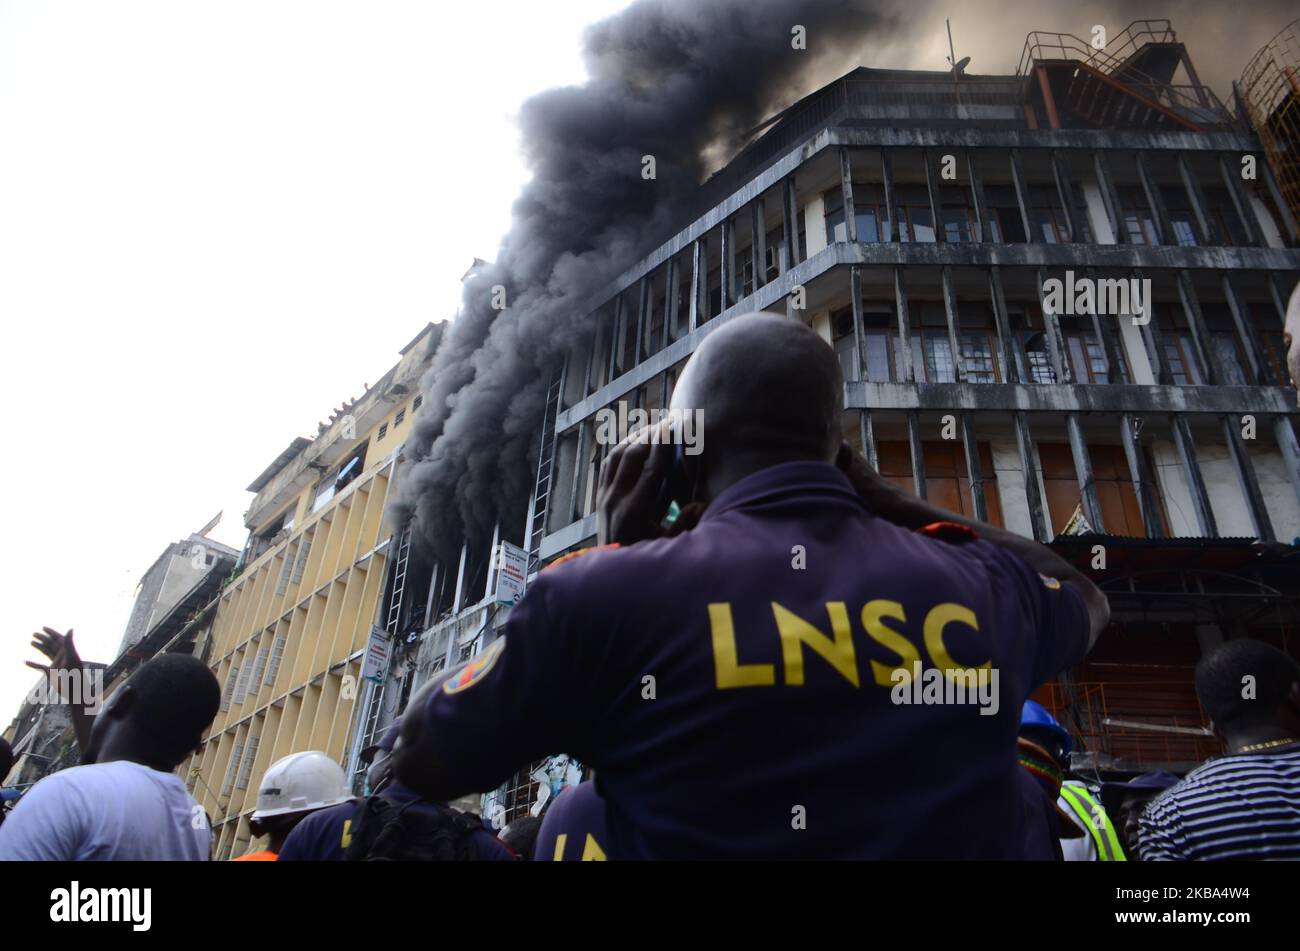 Balogun market fire outbreak Huge blazing fire breaks out at a busy shopping hub in the central business district of Lagos, Nigeria. A fire guts a seven-storey building destroying warehouses and stores stocked with fabrics and shoes,well-stocked shops, at the busy Balogun Market in Lagos, Nigeria on November 5, 2019, in Lagos Nigeria's economic capital was gutted by fire early in the day destroying goods mostly fabrics, shoes and valuables stocked ahead of Christmas shopping. (Photo by Olukayode Jaiyeola/NurPhoto) Stock Photo